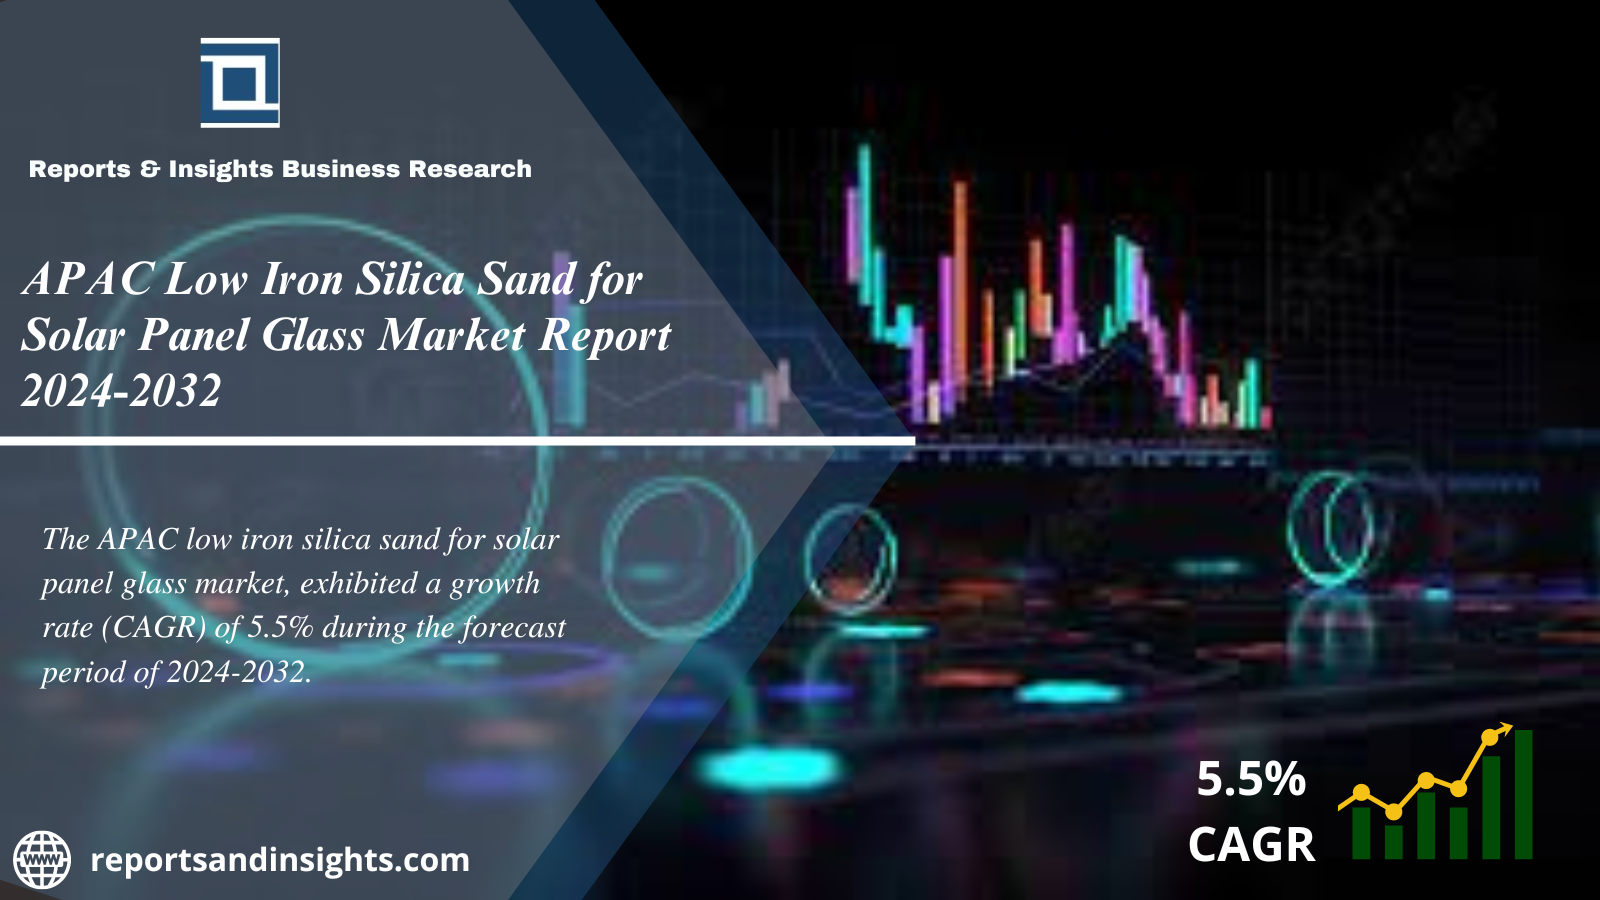 APAC Low Iron Silica Sand for Solar Panel Glass Market 2024 to 2032: Size, Share, Growth, Trends and Opportunities